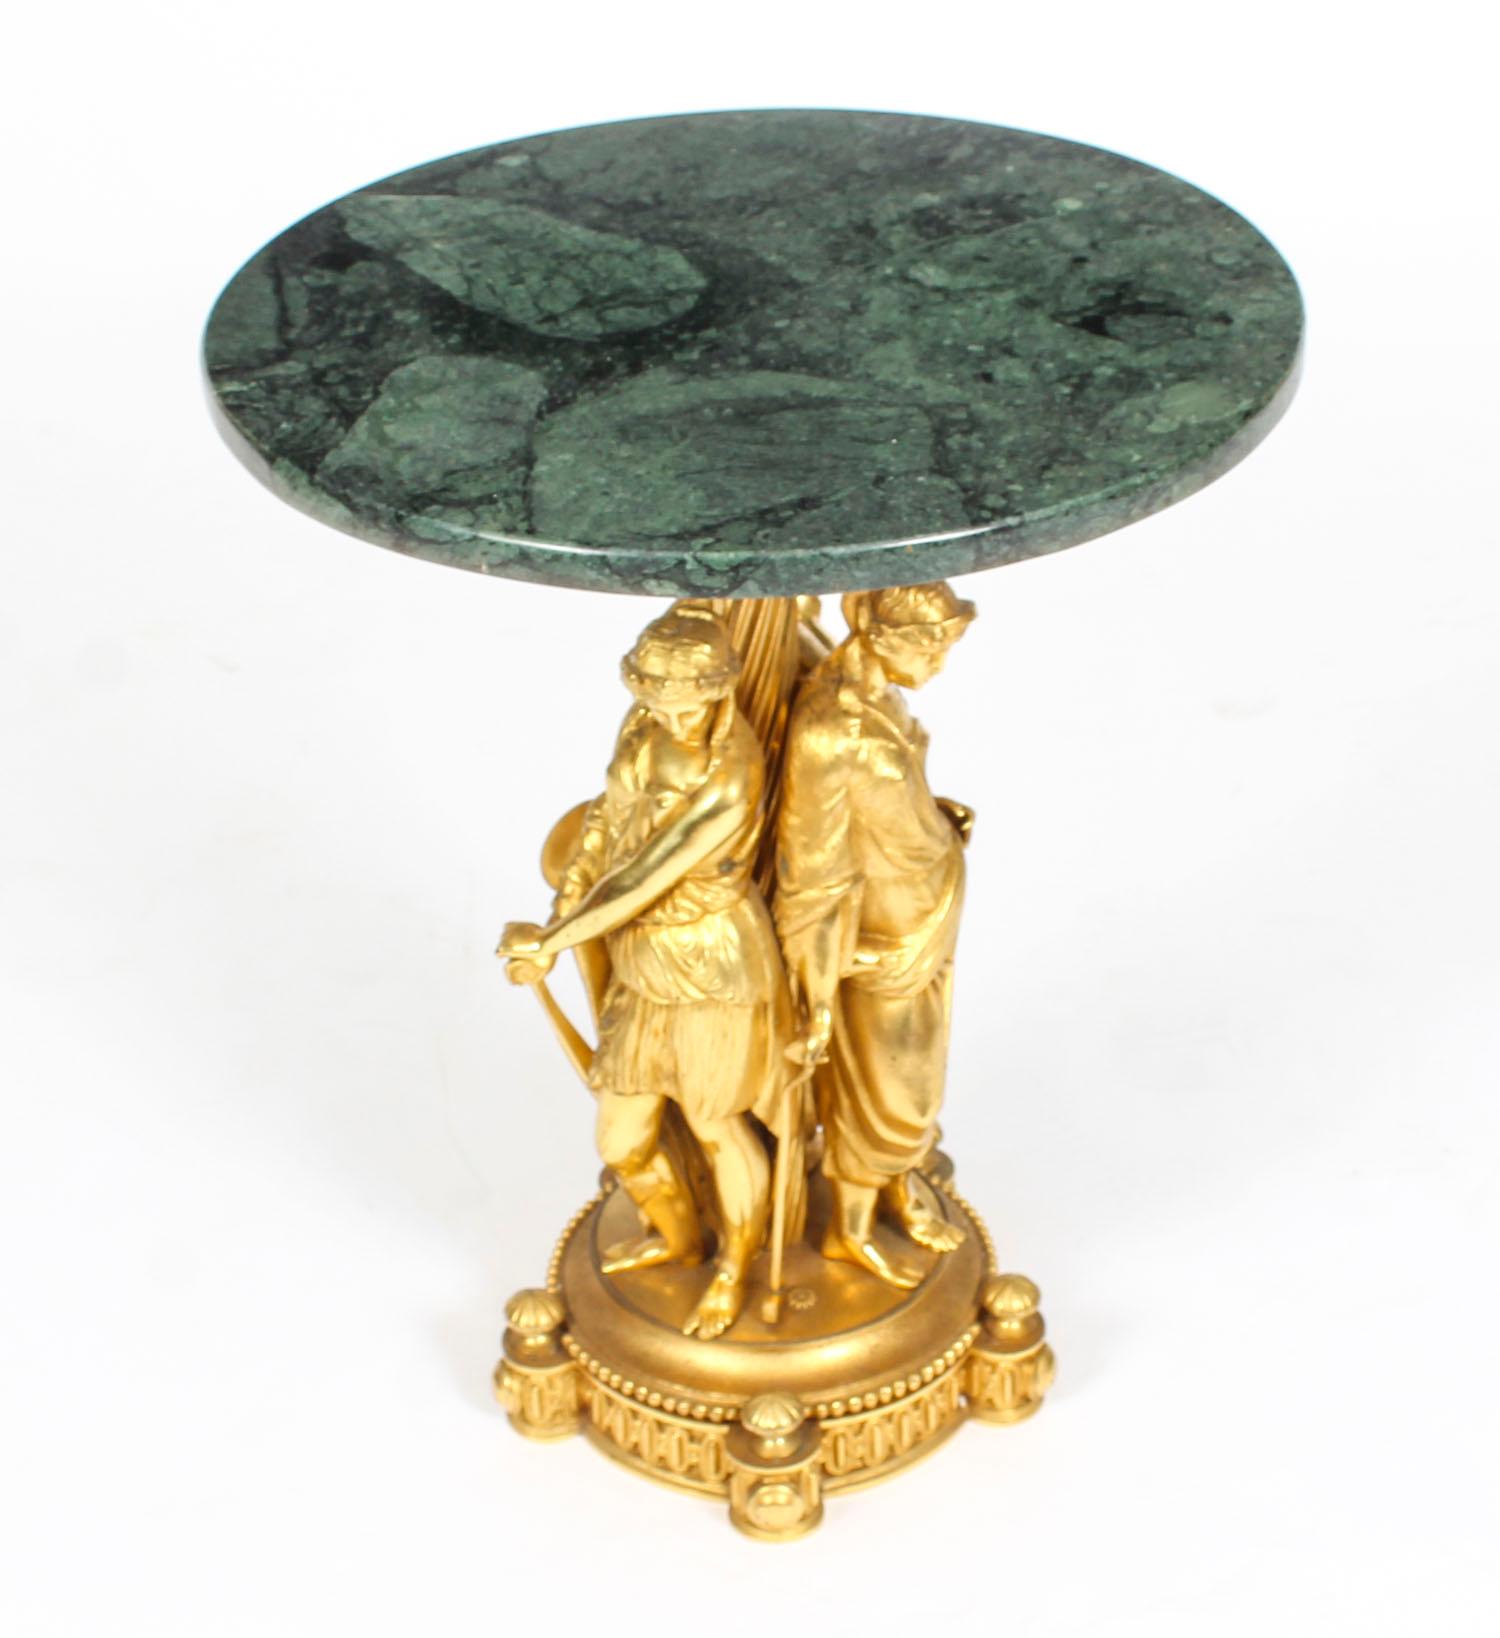 This is a fabulous quality antique French ormolu figural group 